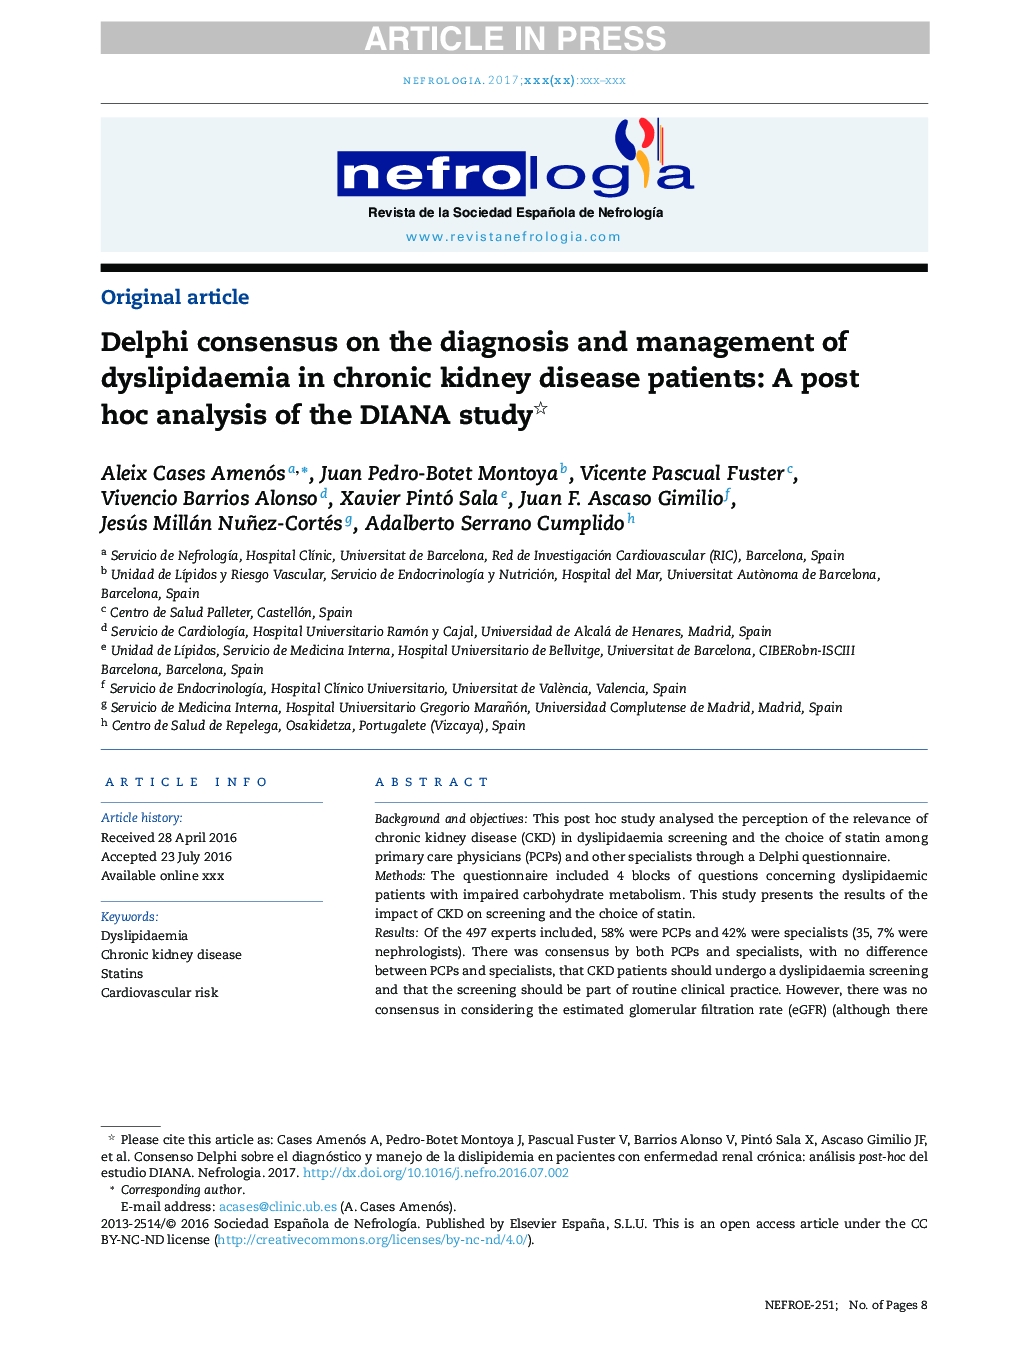 Delphi consensus on the diagnosis and management of dyslipidaemia in chronic kidney disease patients: A post hoc analysis of the DIANA study